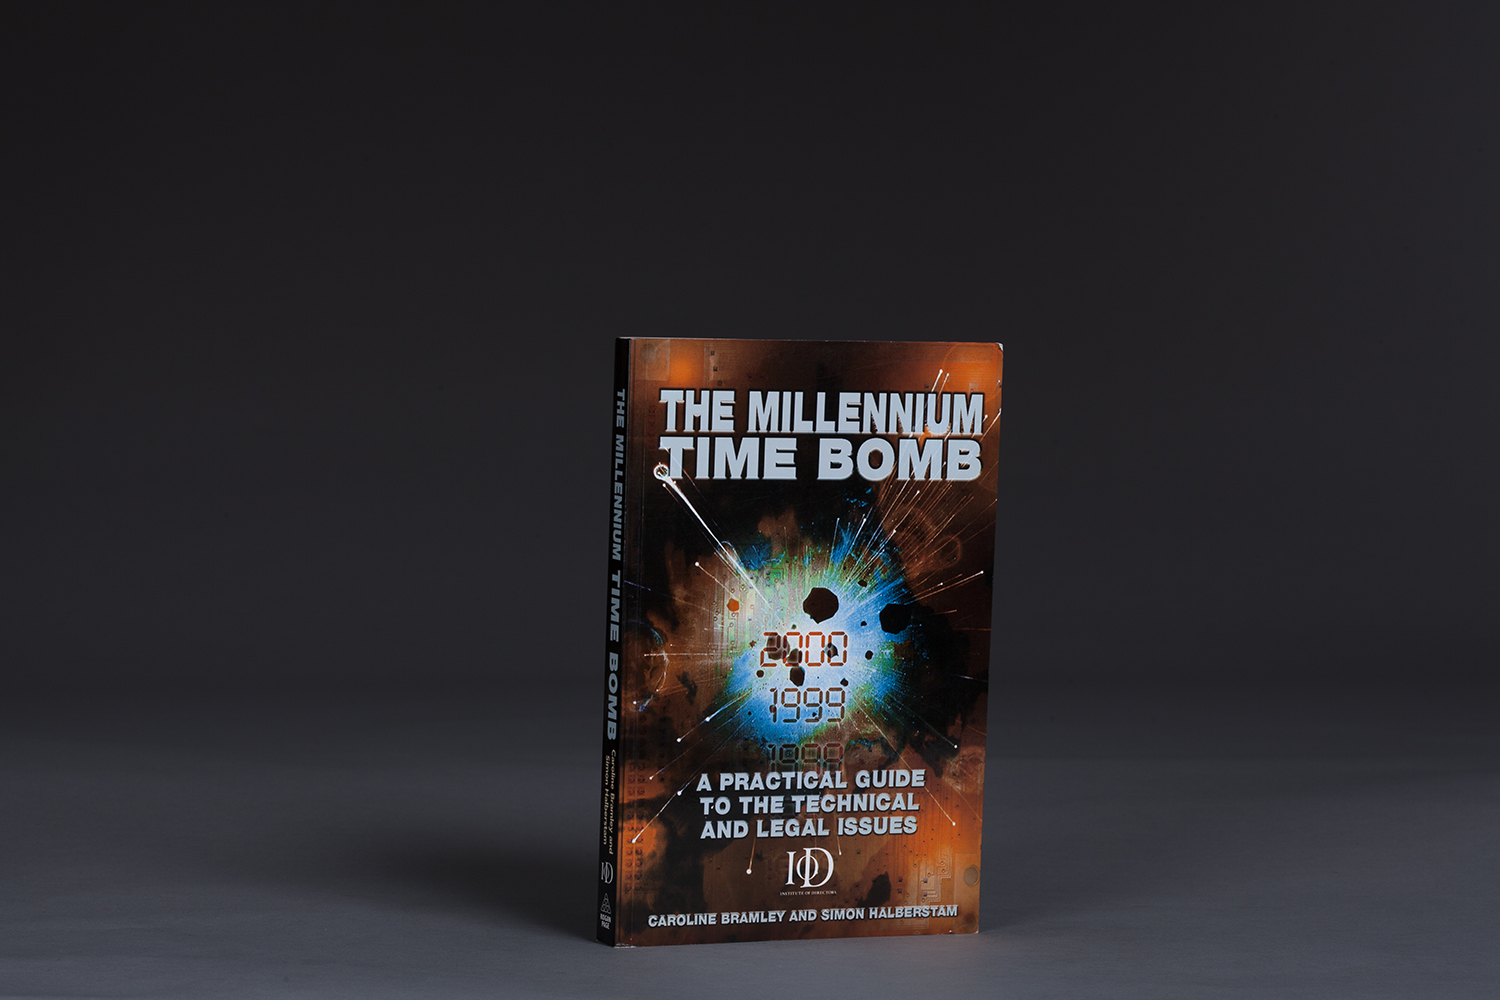 The Millennium Time Bomb - 0417 Cover.jpg